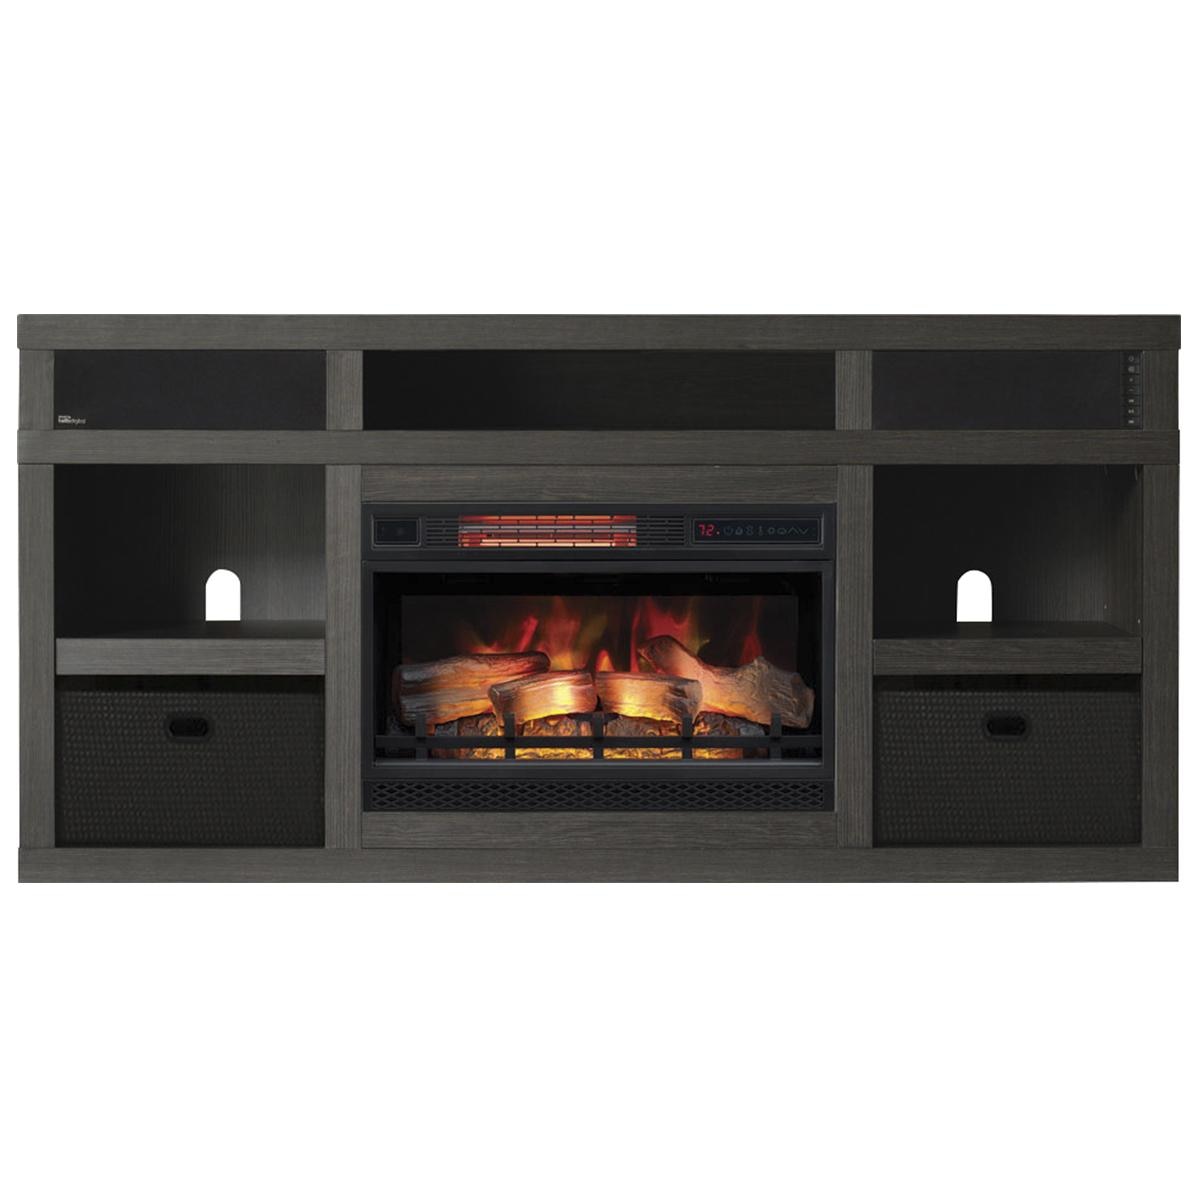 Tv Fire Wall Awesome Fabio Flames Greatlin 3 Piece Fireplace Entertainment Wall